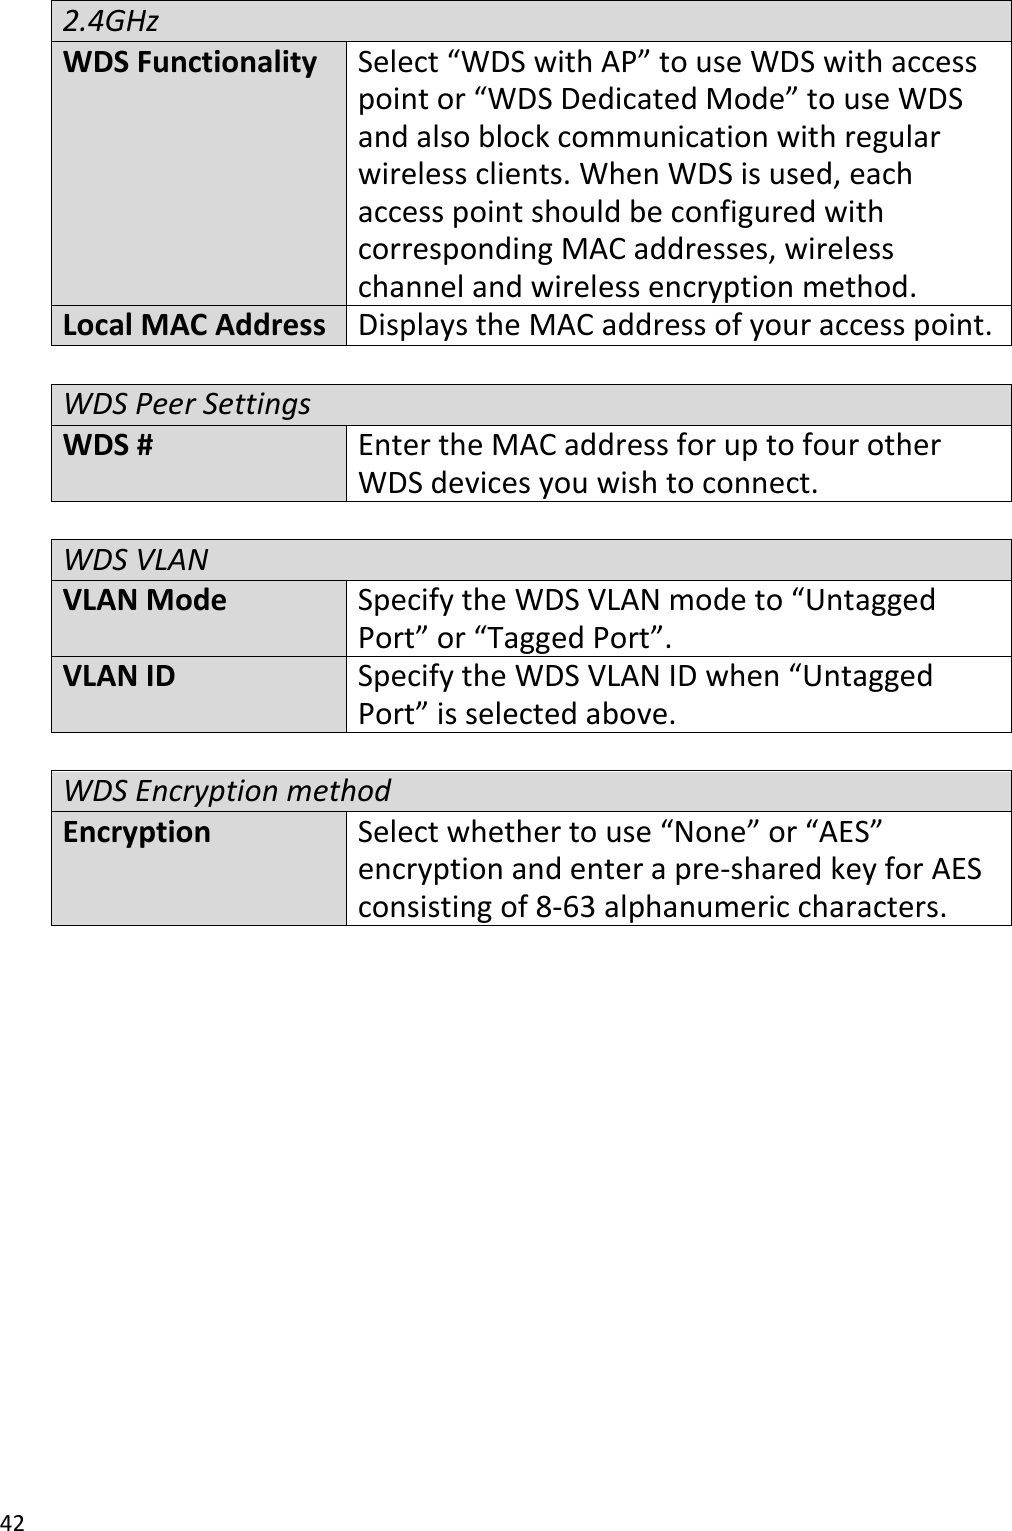 42   2.4GHz WDS Functionality Select “WDS with AP” to use WDS with access point or “WDS Dedicated Mode” to use WDS and also block communication with regular wireless clients. When WDS is used, each access point should be configured with corresponding MAC addresses, wireless channel and wireless encryption method. Local MAC Address Displays the MAC address of your access point.  WDS Peer Settings WDS # Enter the MAC address for up to four other WDS devices you wish to connect.  WDS VLAN VLAN Mode Specify the WDS VLAN mode to “Untagged Port” or “Tagged Port”. VLAN ID Specify the WDS VLAN ID when “Untagged Port” is selected above.  WDS Encryption method Encryption Select whether to use “None” or “AES” encryption and enter a pre-shared key for AES consisting of 8-63 alphanumeric characters.   